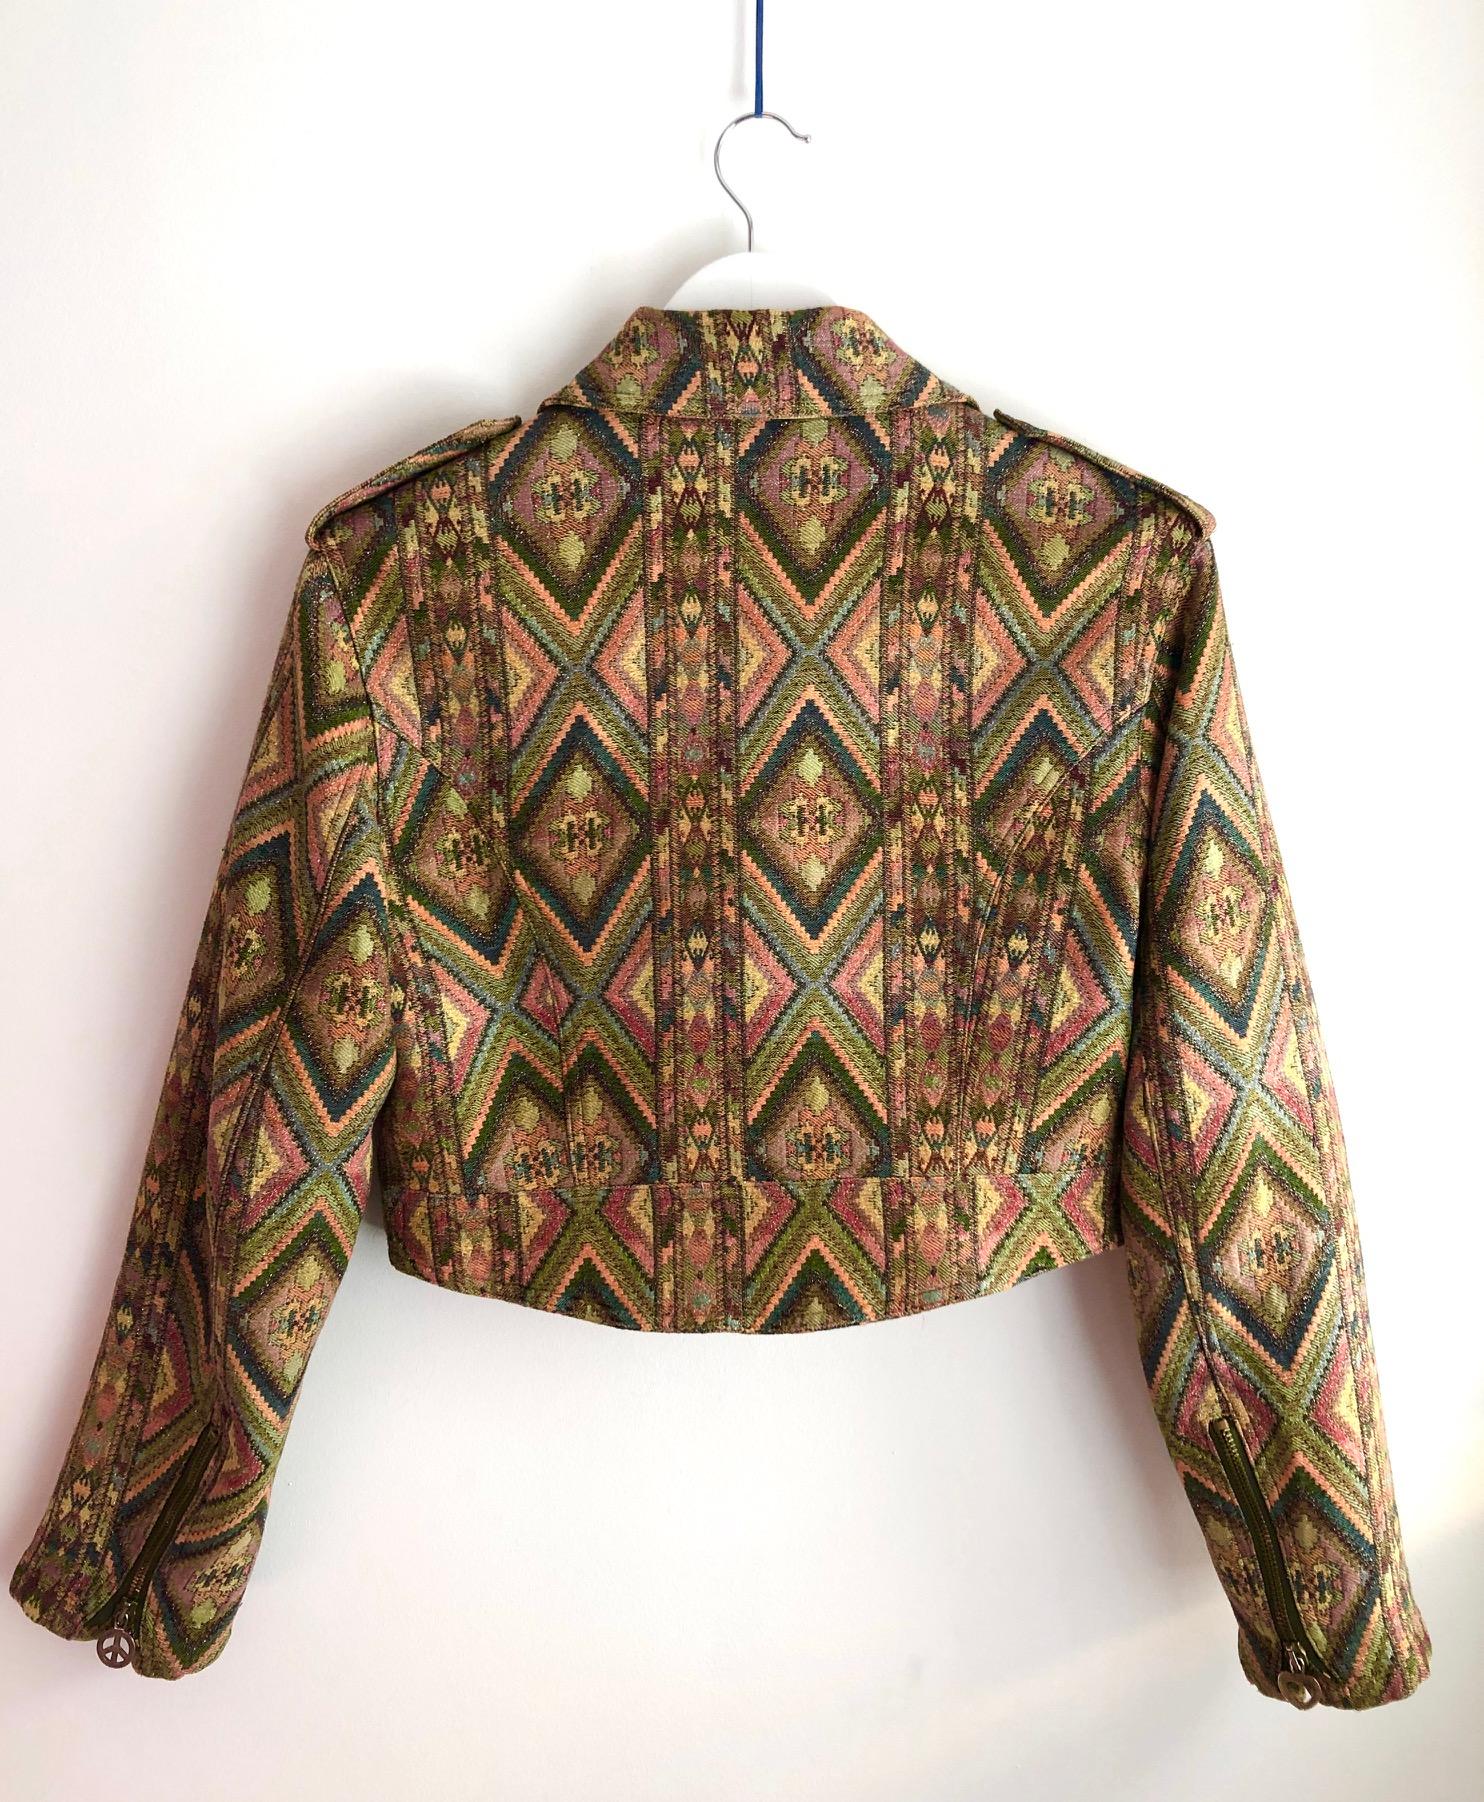 Moschino Jeans bolero biker jacket featuring geometric multicolored print, across zip closure, frontal zipped pockets, metal charms, cotton Rayon, green silky lining, Made in Italy 

Condition: 1980s/1990s, vintage in excellent condition

Size: 42